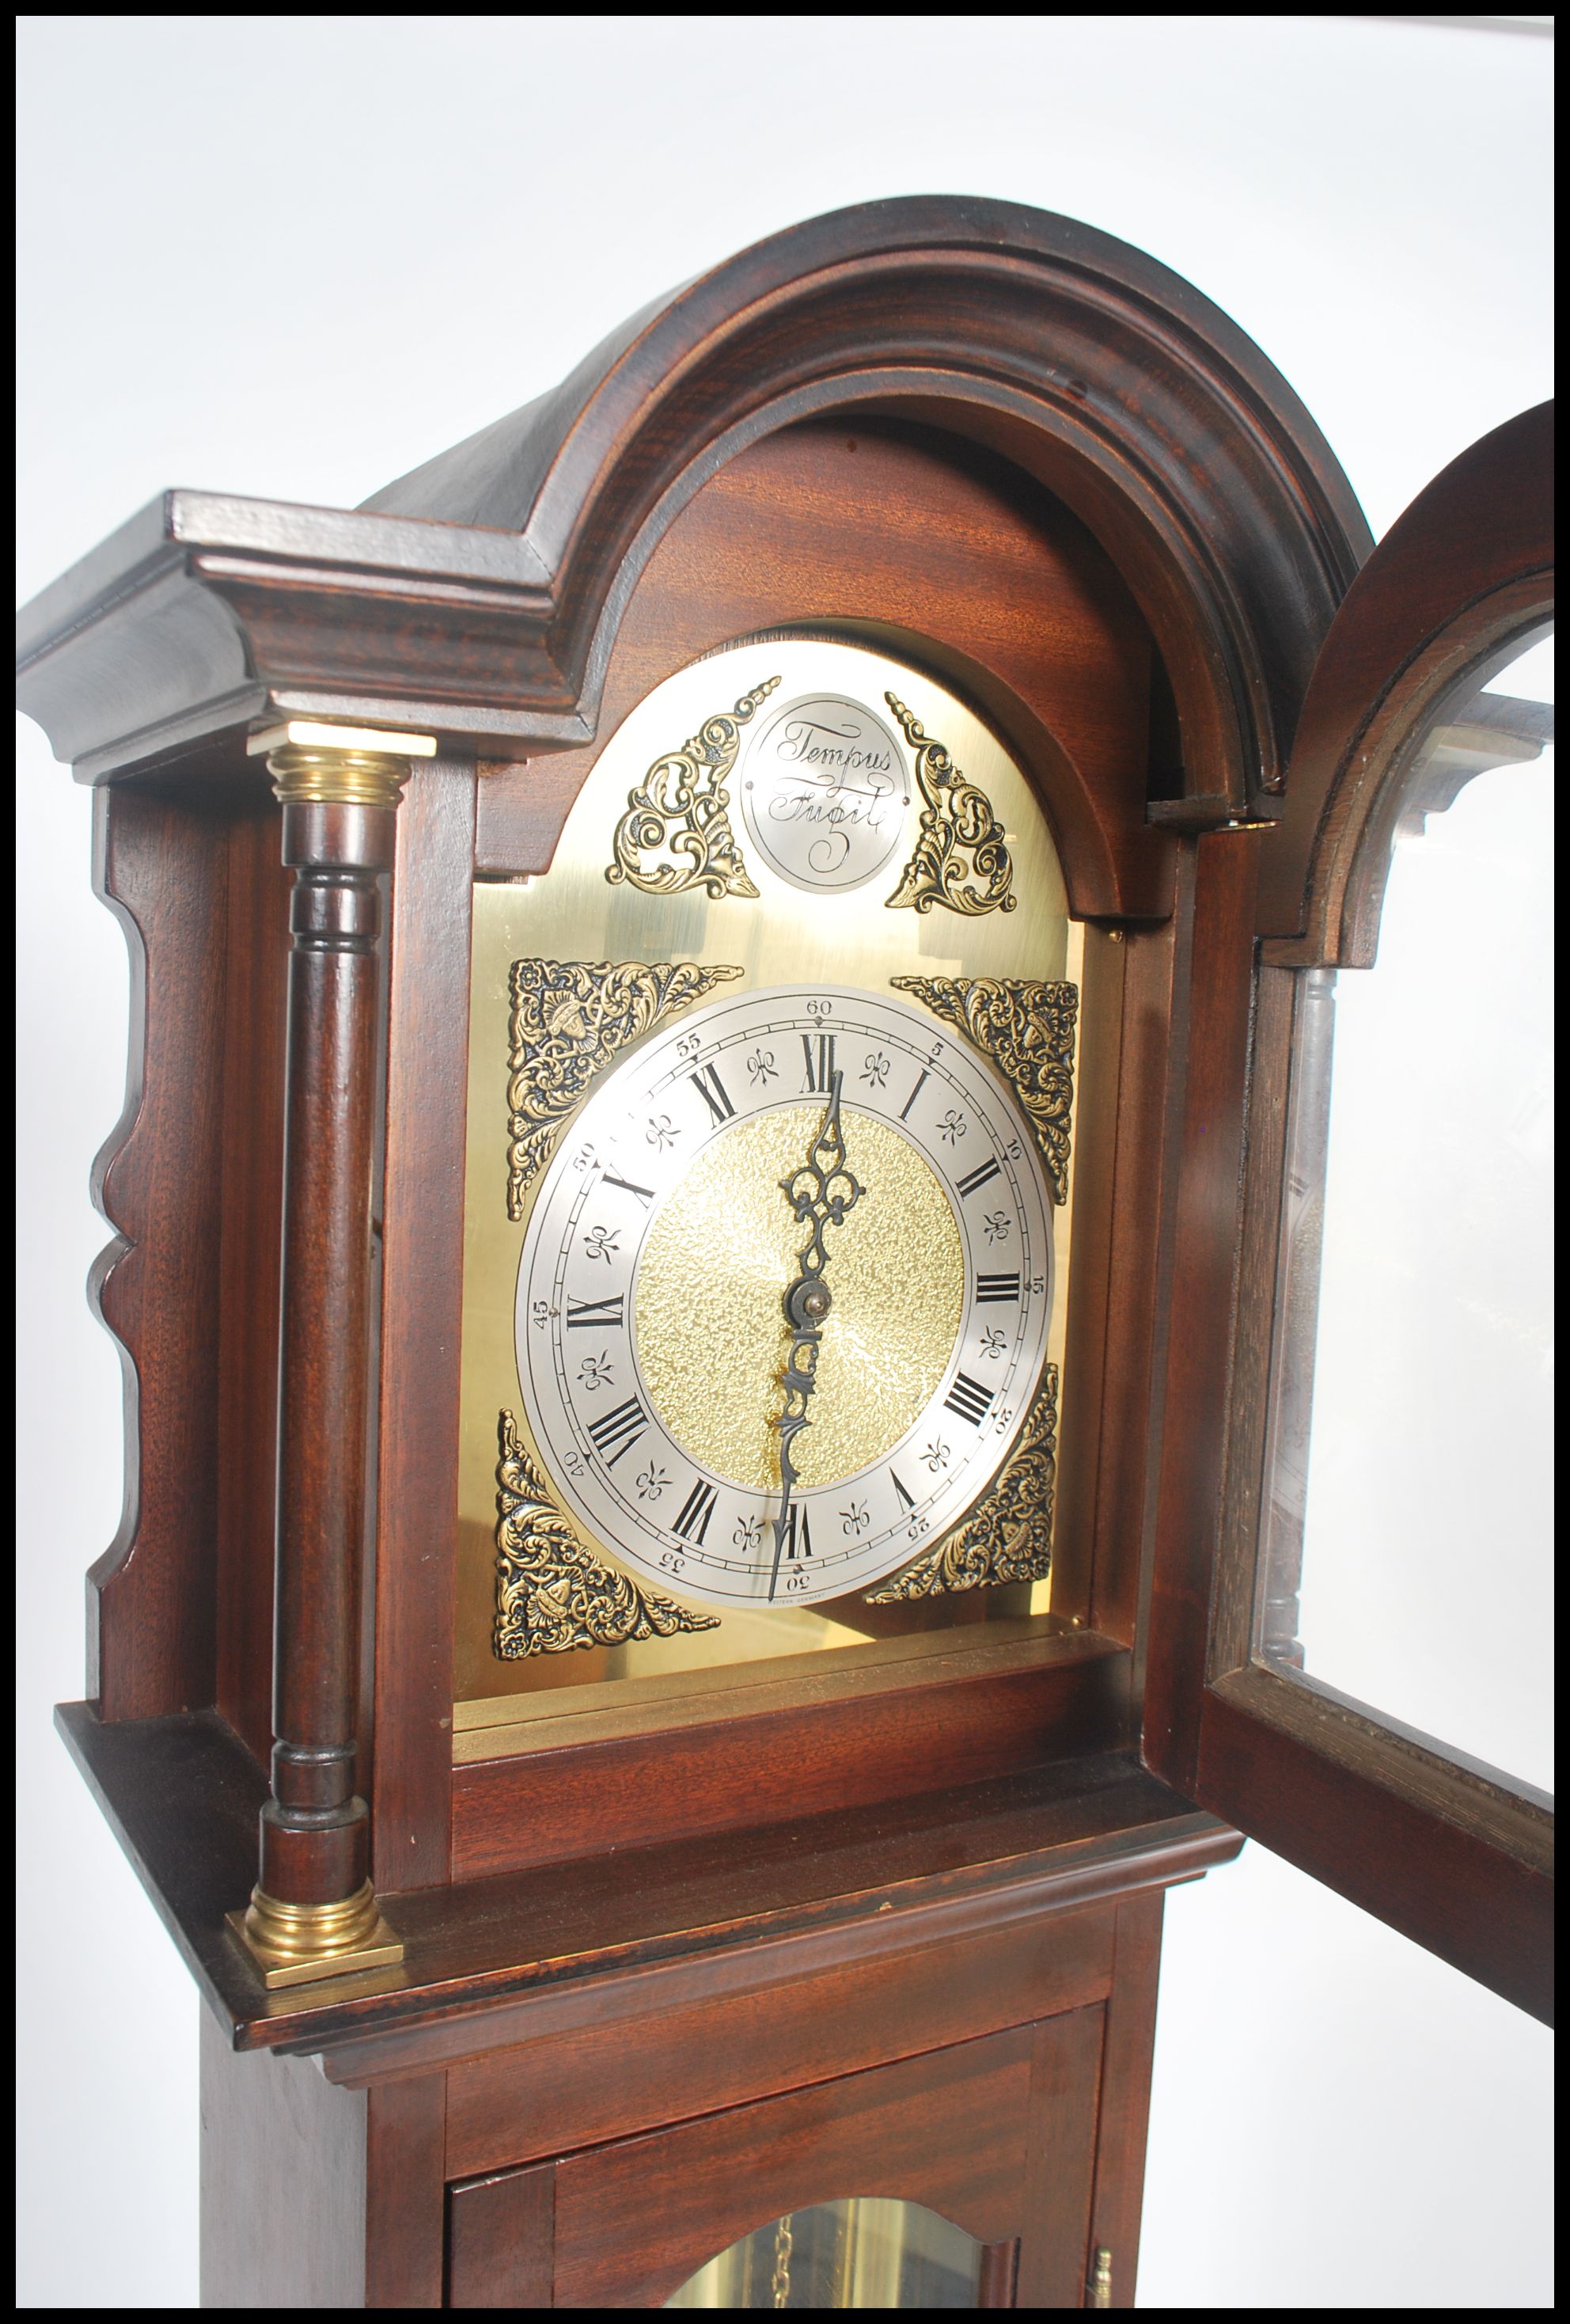 A Tempus Fugit grandmother clock with mahogany case and hood having inset brass and silvered dial - Image 3 of 4